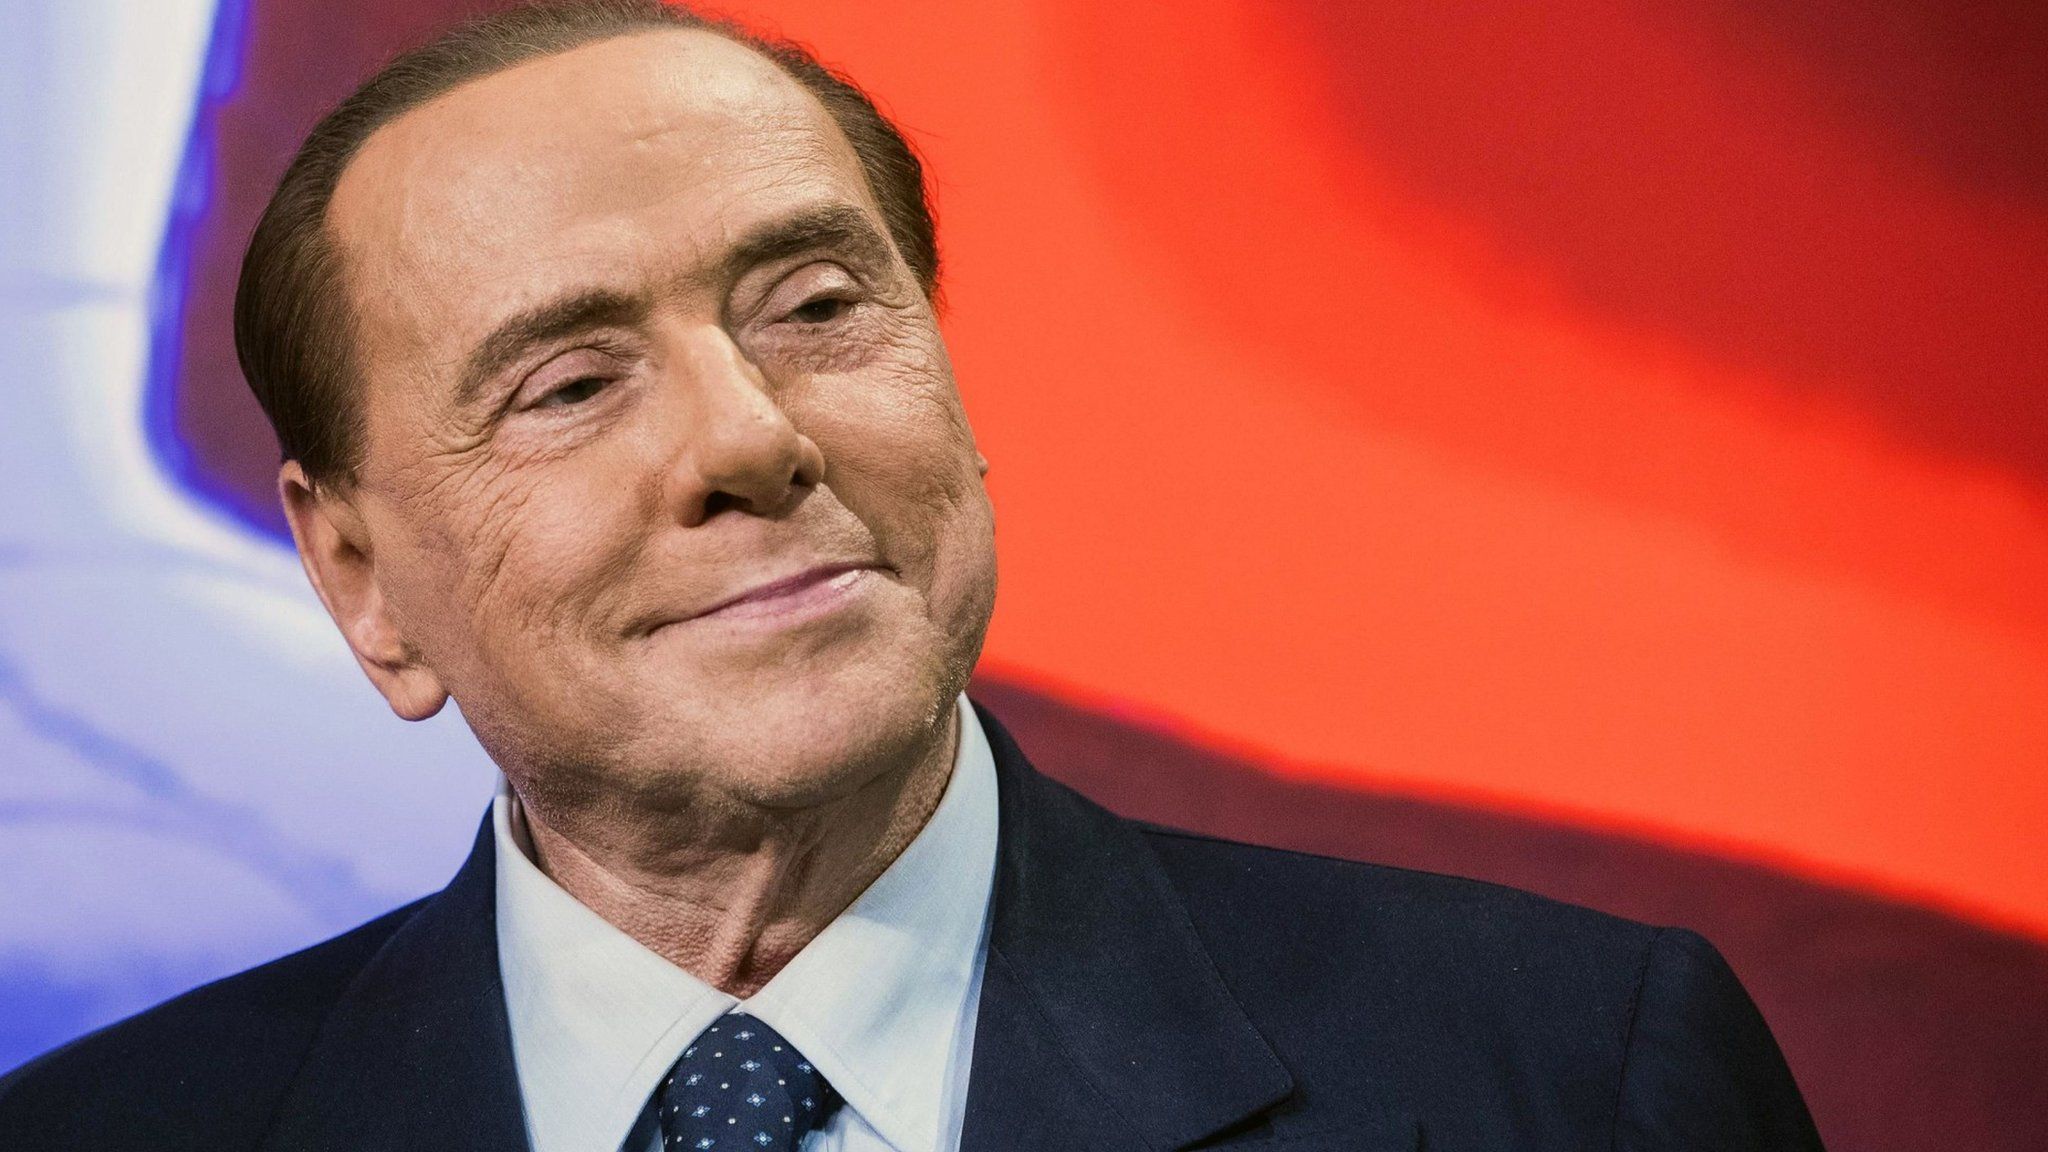 Berlusconi smiles at an event in 2018